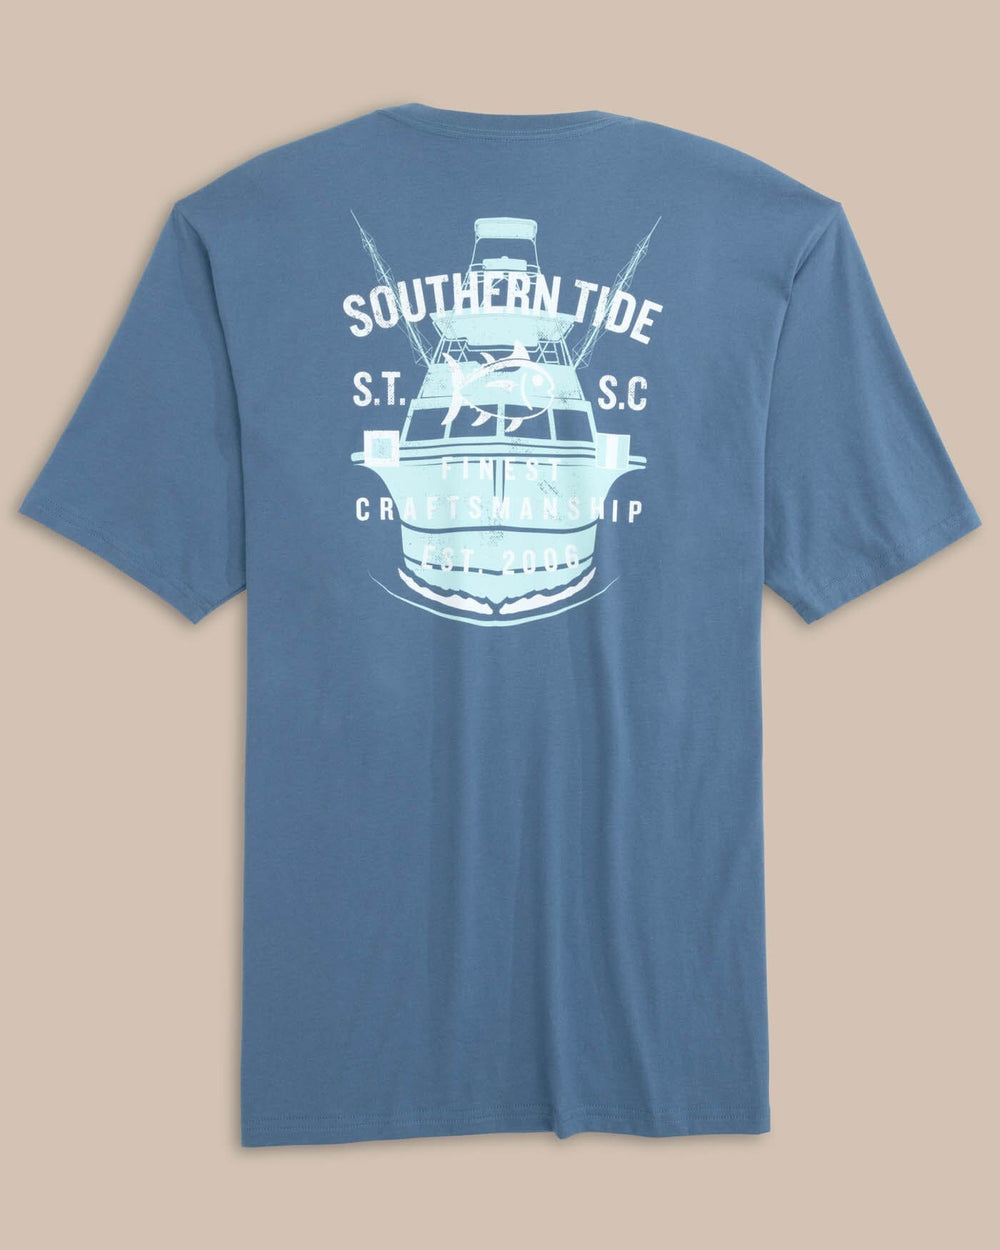 The back view of the Southern Tide Finest Craftsmanship Short Sleeve T-Shirt by Southern Tide - Coronet Blue